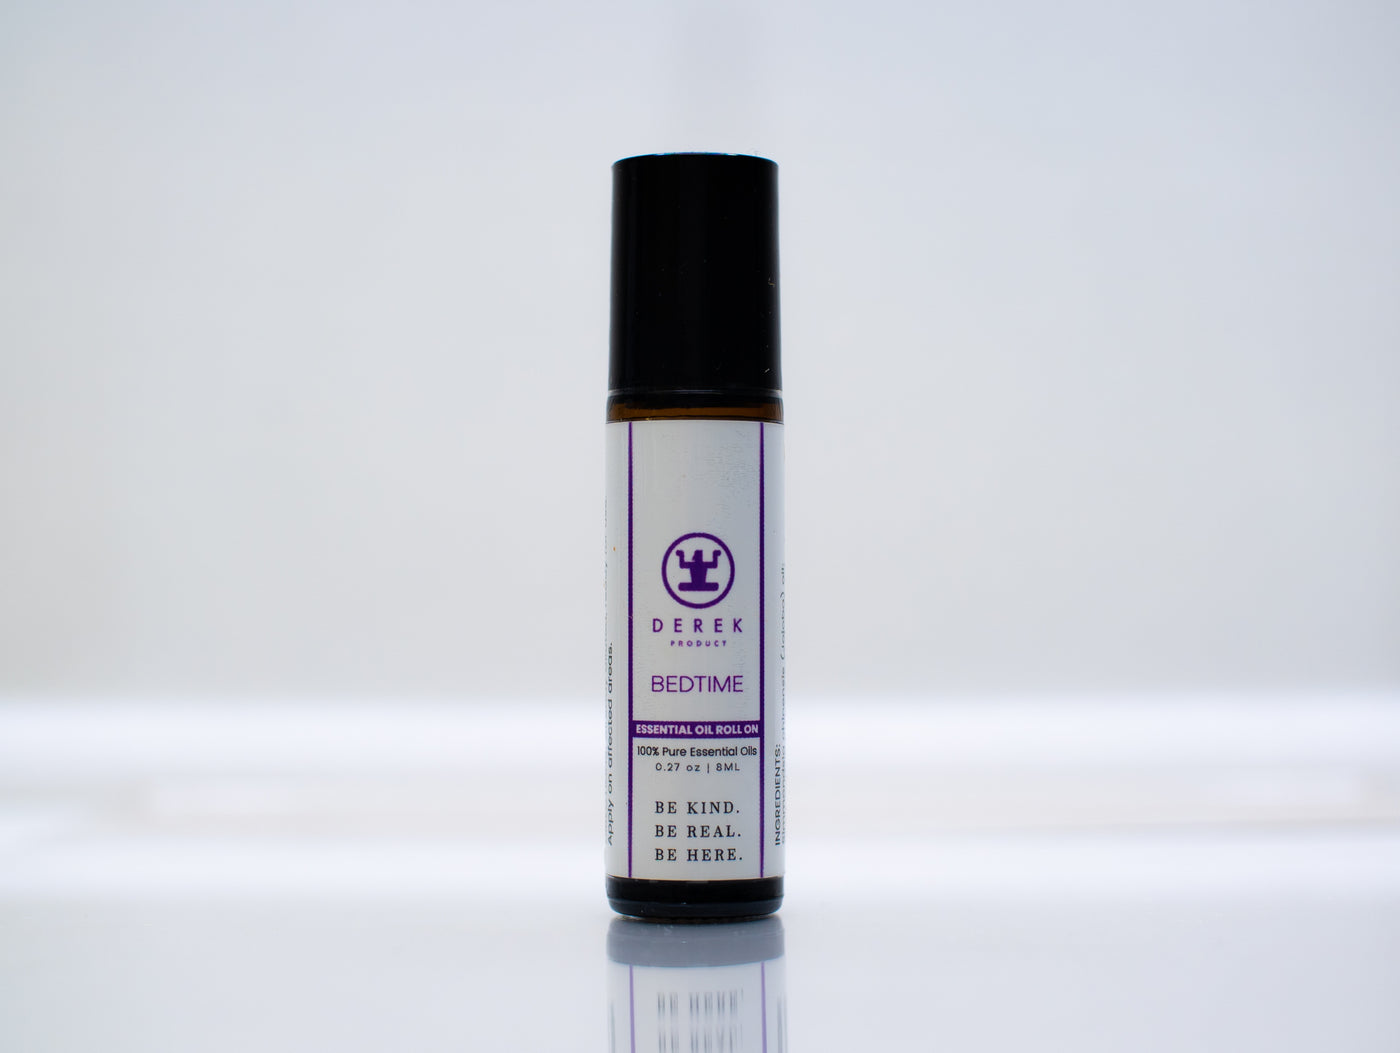 Derek Product- Bedtime Essential Oil Roll On for Aromatherapy and Relaxation | Soothing Blend | 8ML - DerekProduct